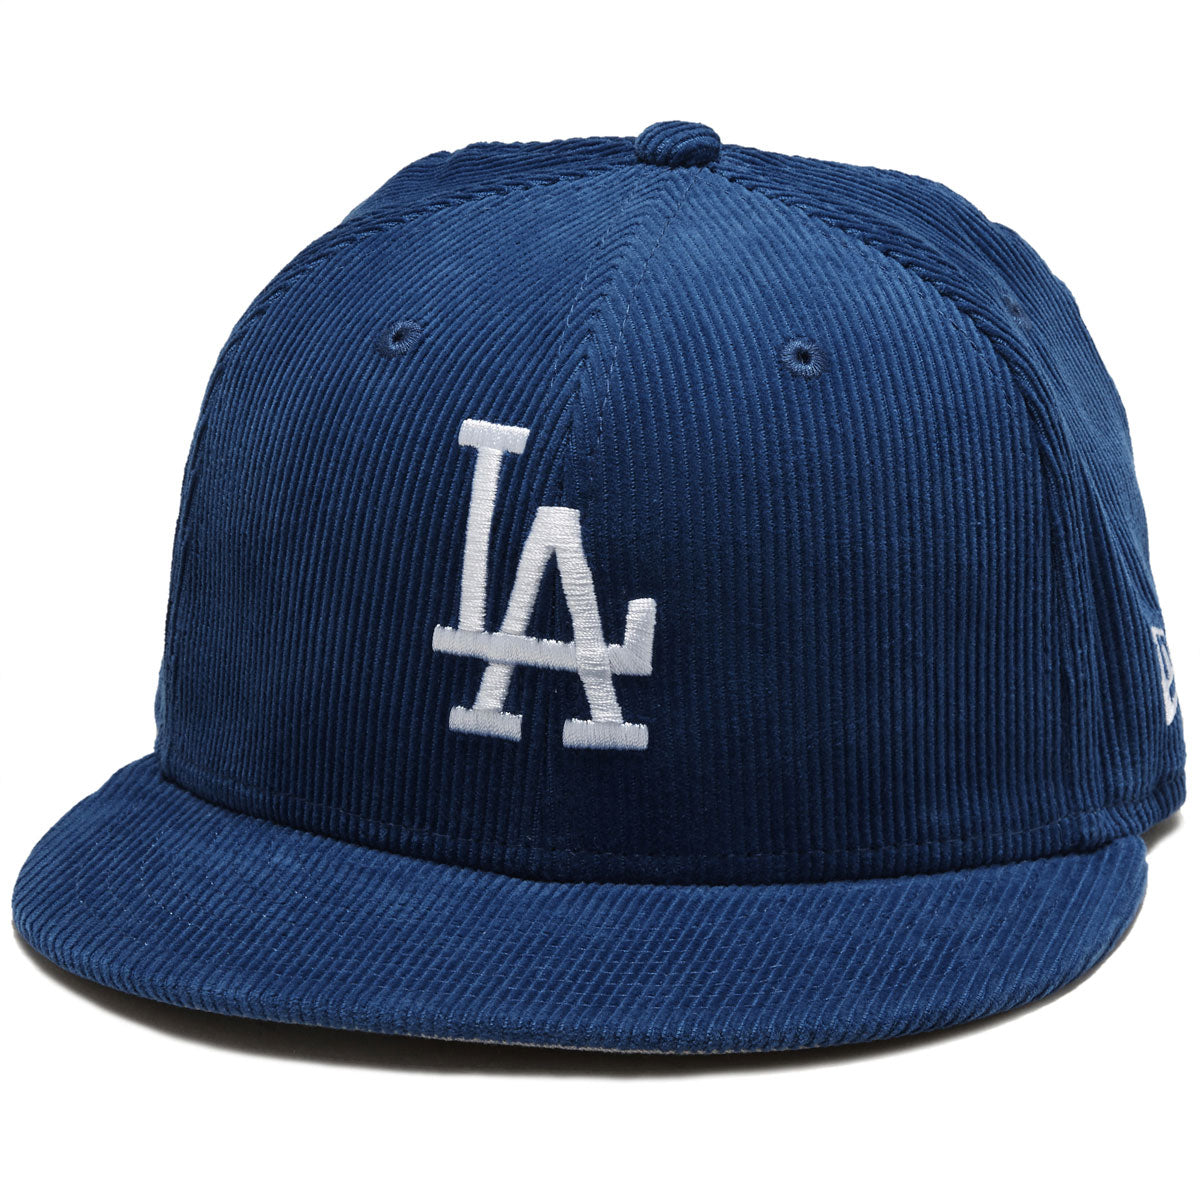 New Era Throwback Cord 17208 Los Angeles Dodgers Hat - Blue image 1